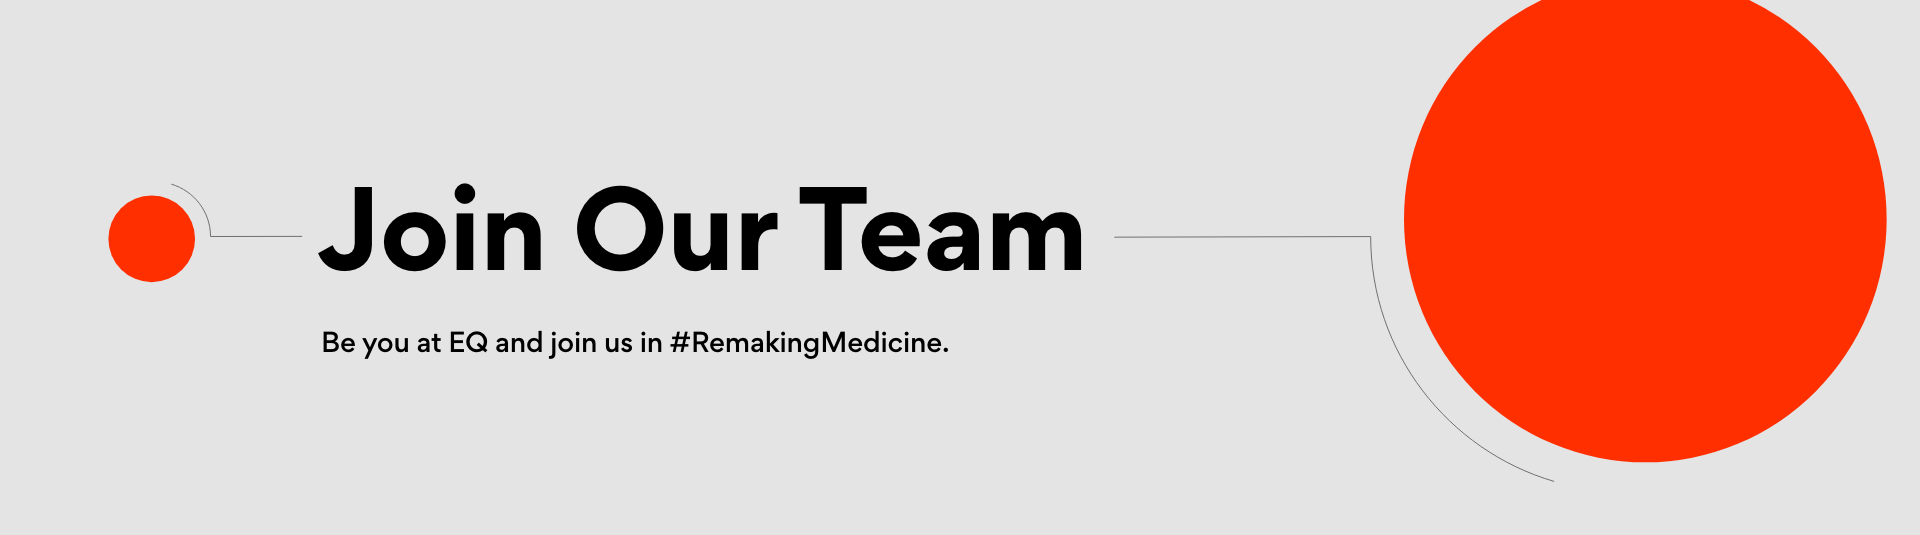 Join Our Team: Be you at EQ and join us in #RemakingMedicine.